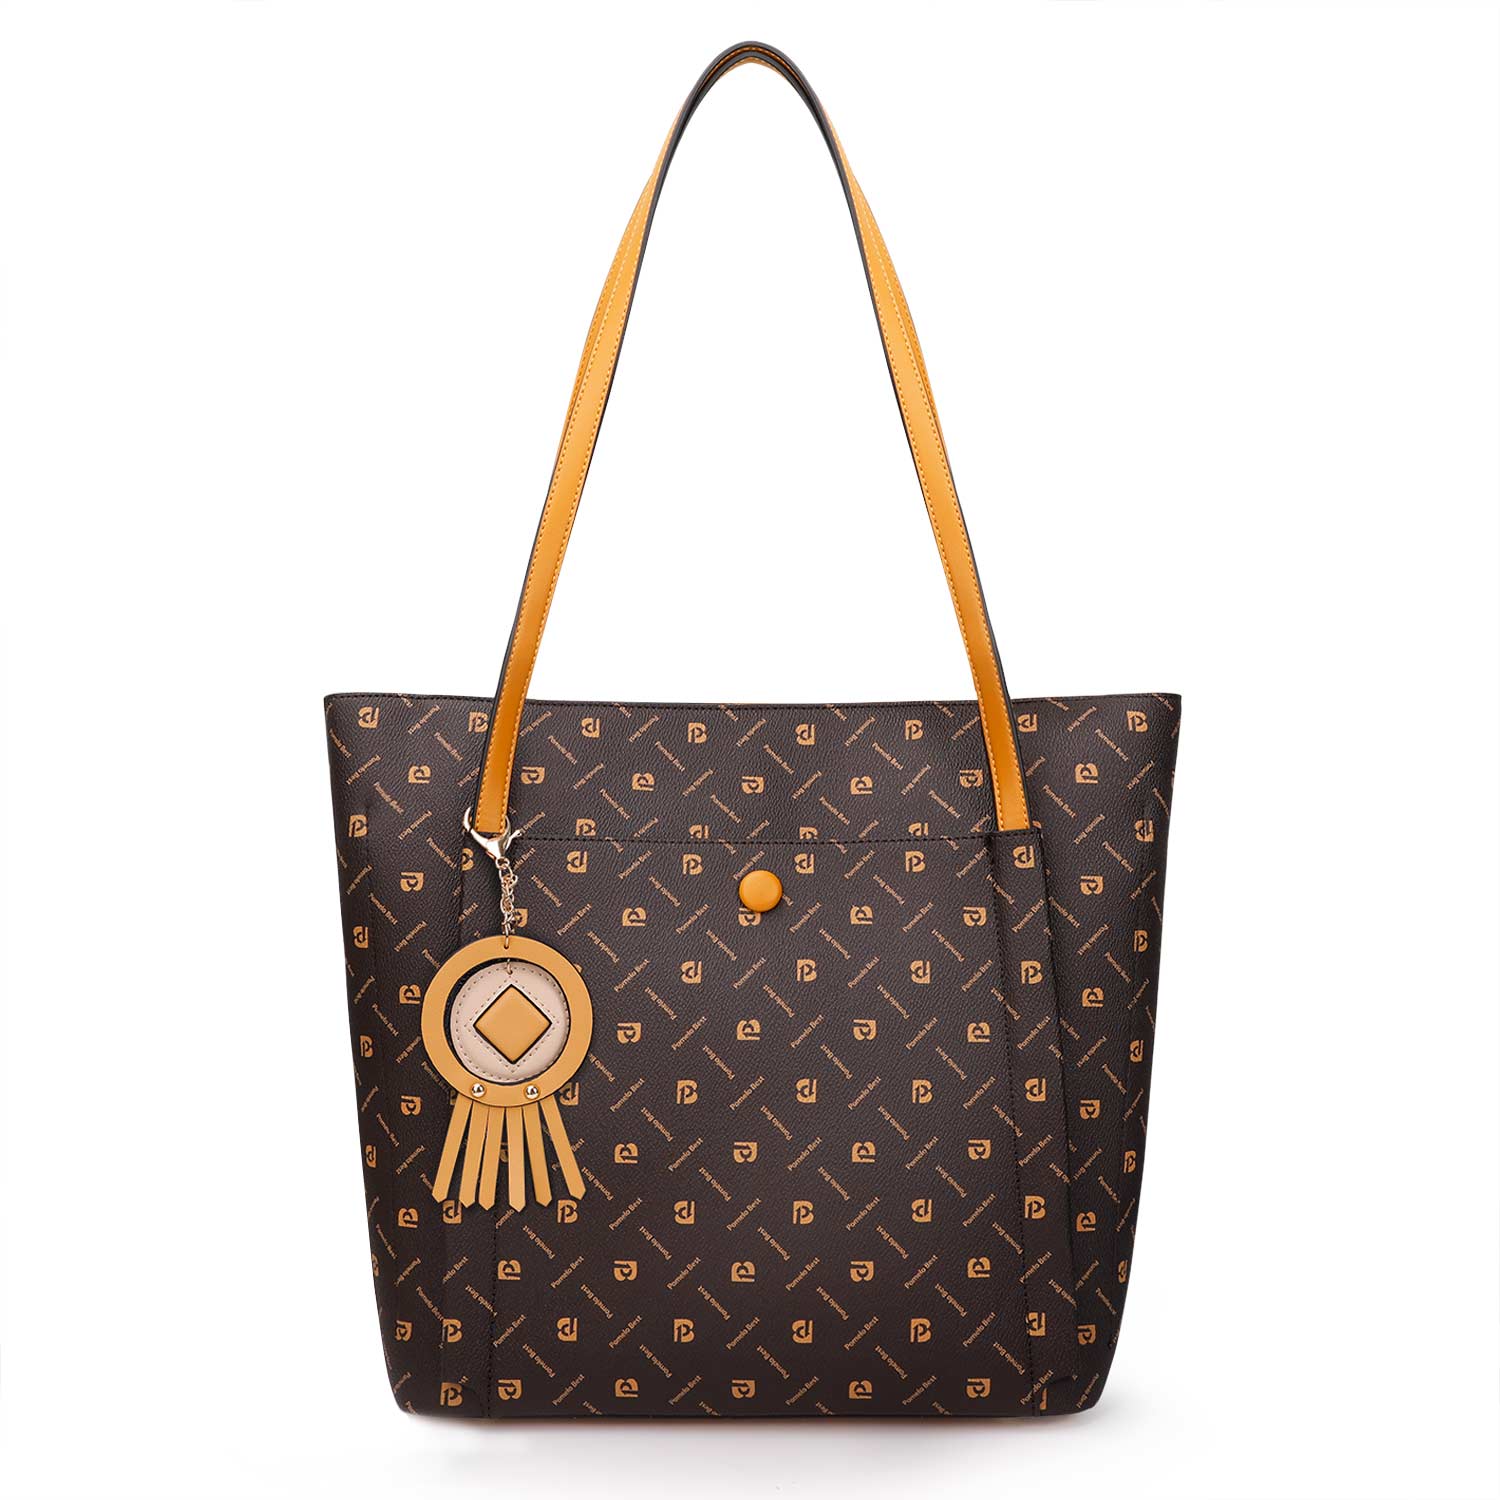 Designer Tote Bags for Women with Matching Wallet